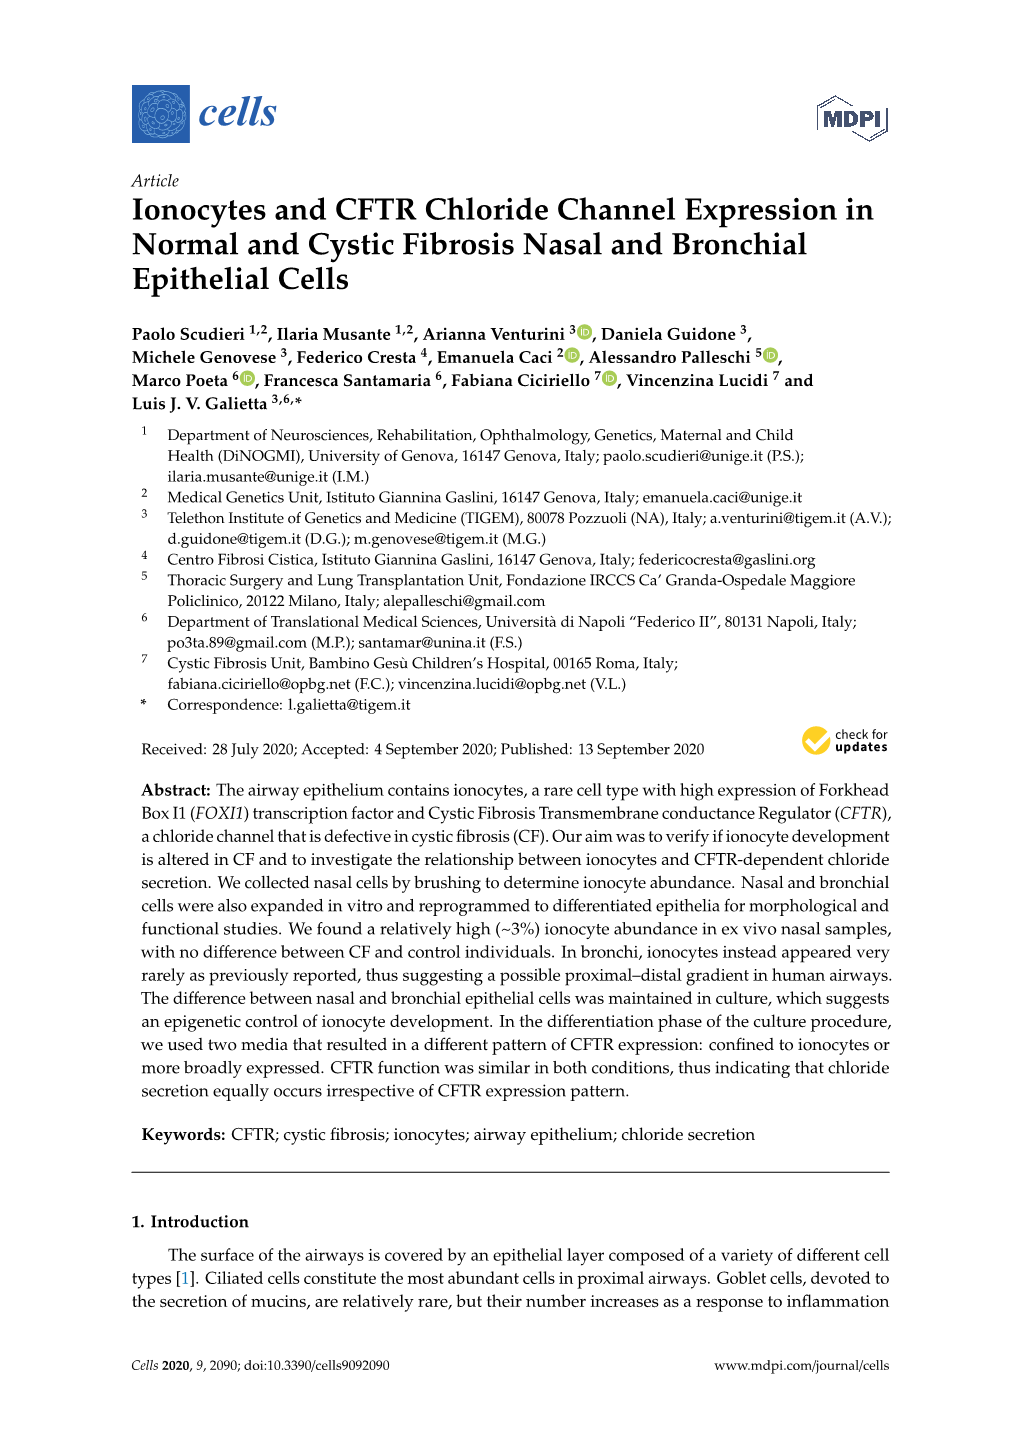 Ionocytes and CFTR Chloride Channel Expression in Normal and Cystic Fibrosis Nasal and Bronchial Epithelial Cells